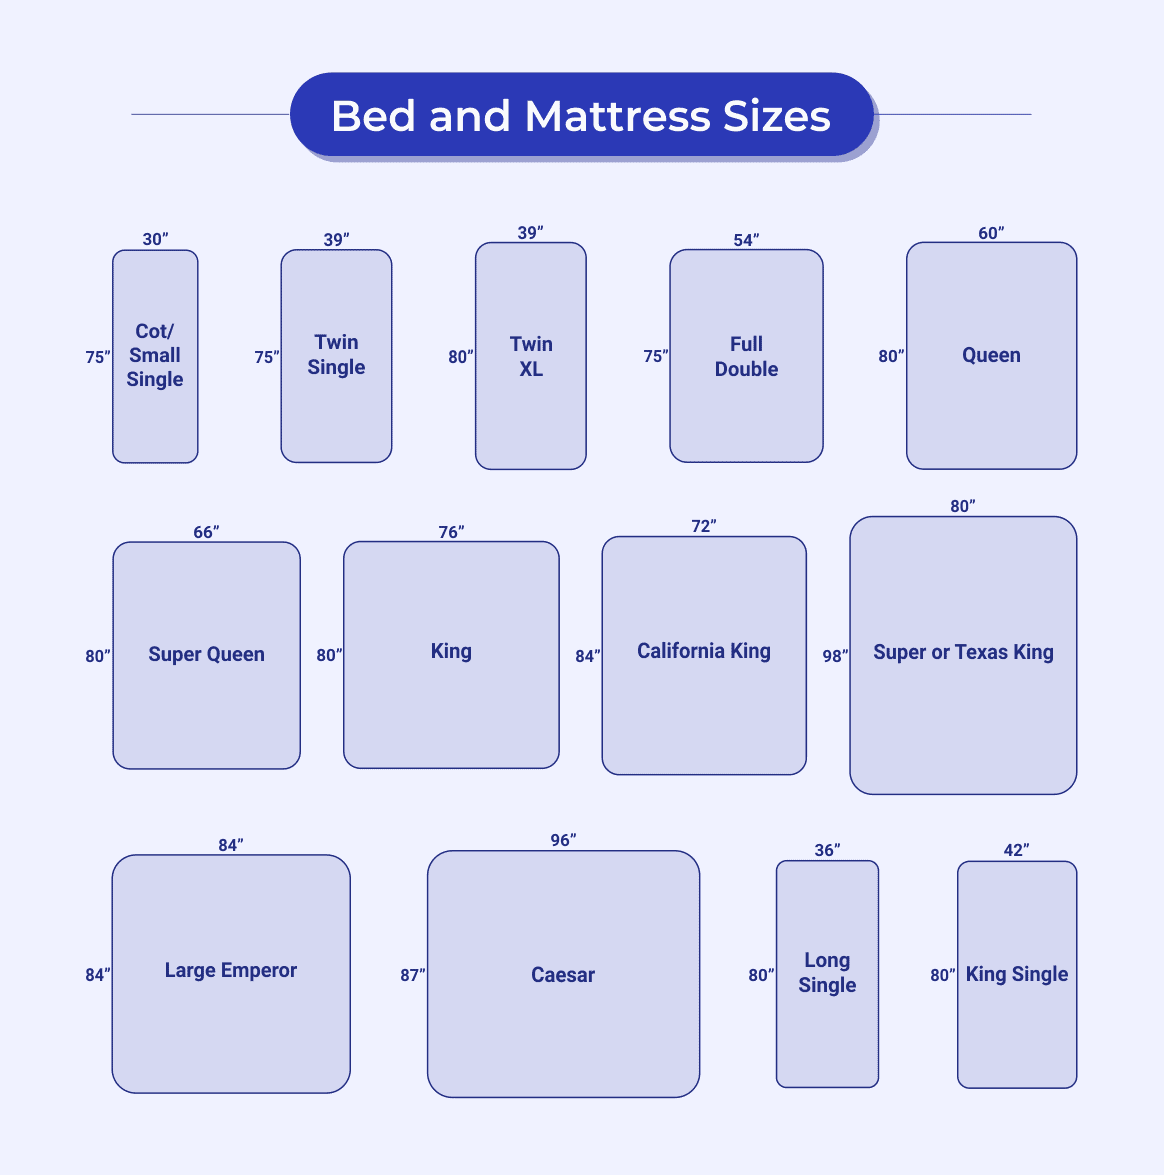 Mattress And Bed Sizes What Are The, Types Of King Size Beds